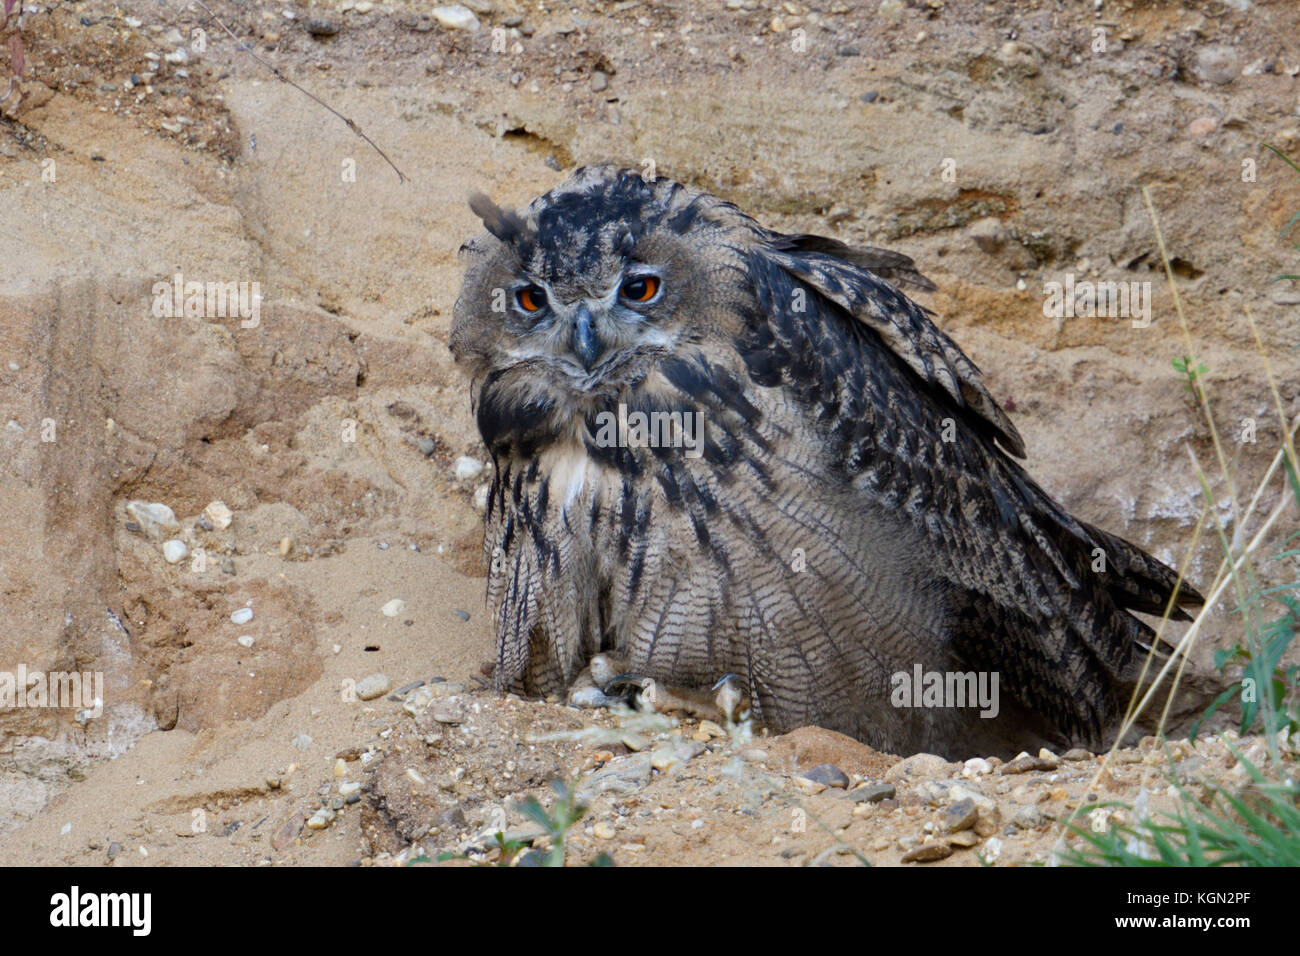 Eurasian Eagle Owls / Europaeische Uhus ( Bubo bubo ), young bird, sitting in the slope of a sand pit, looks tired, sleepy, wildife, Europe. Stock Photo